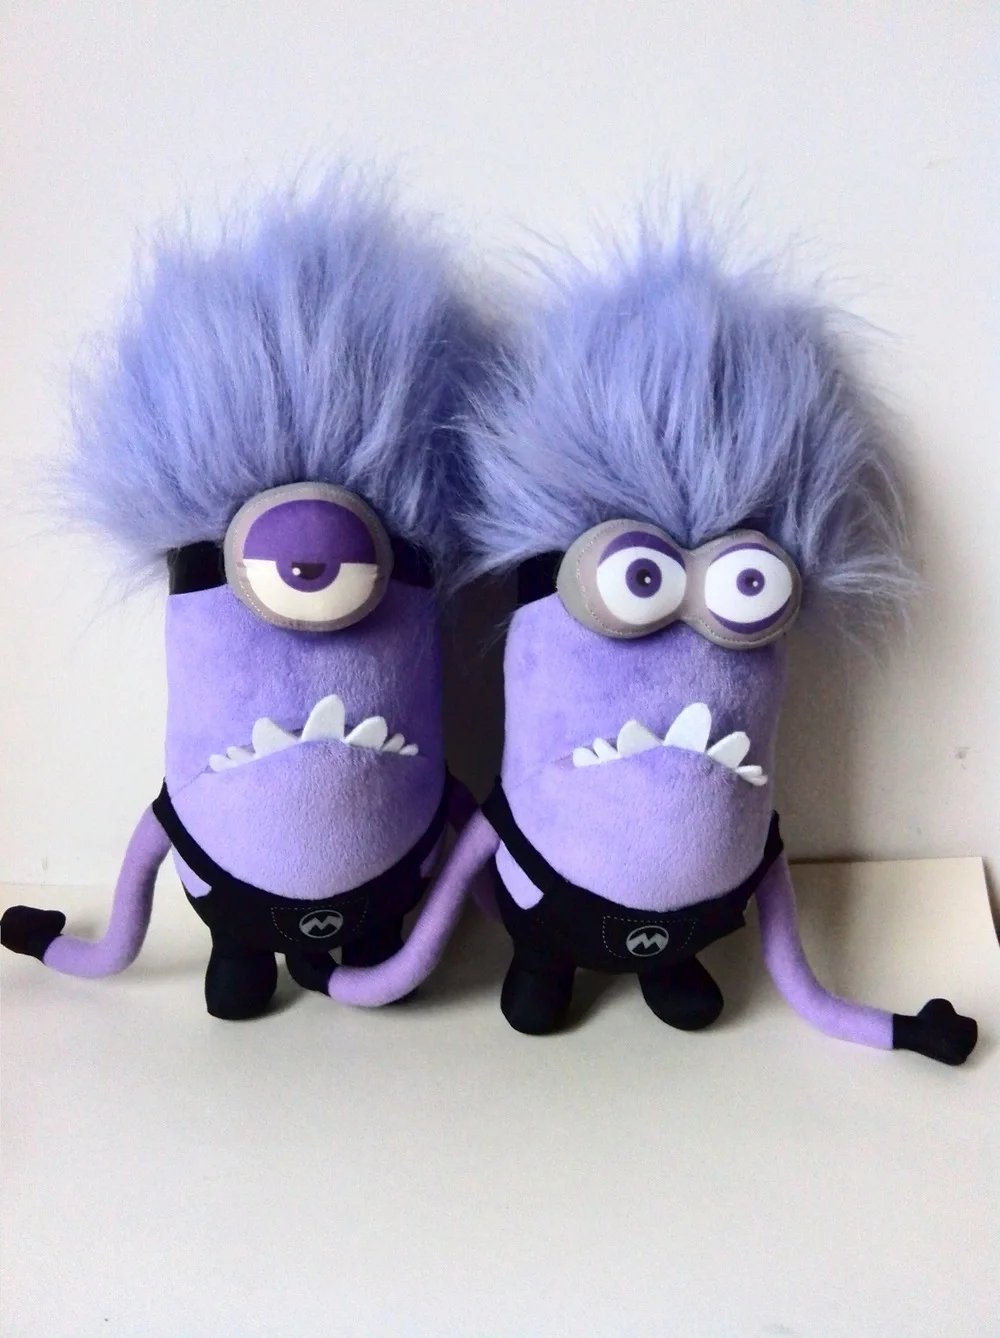 New Despicable Me 2 Purple Poisioned Minion Plush Soft Toy Doll Teddy 10" 